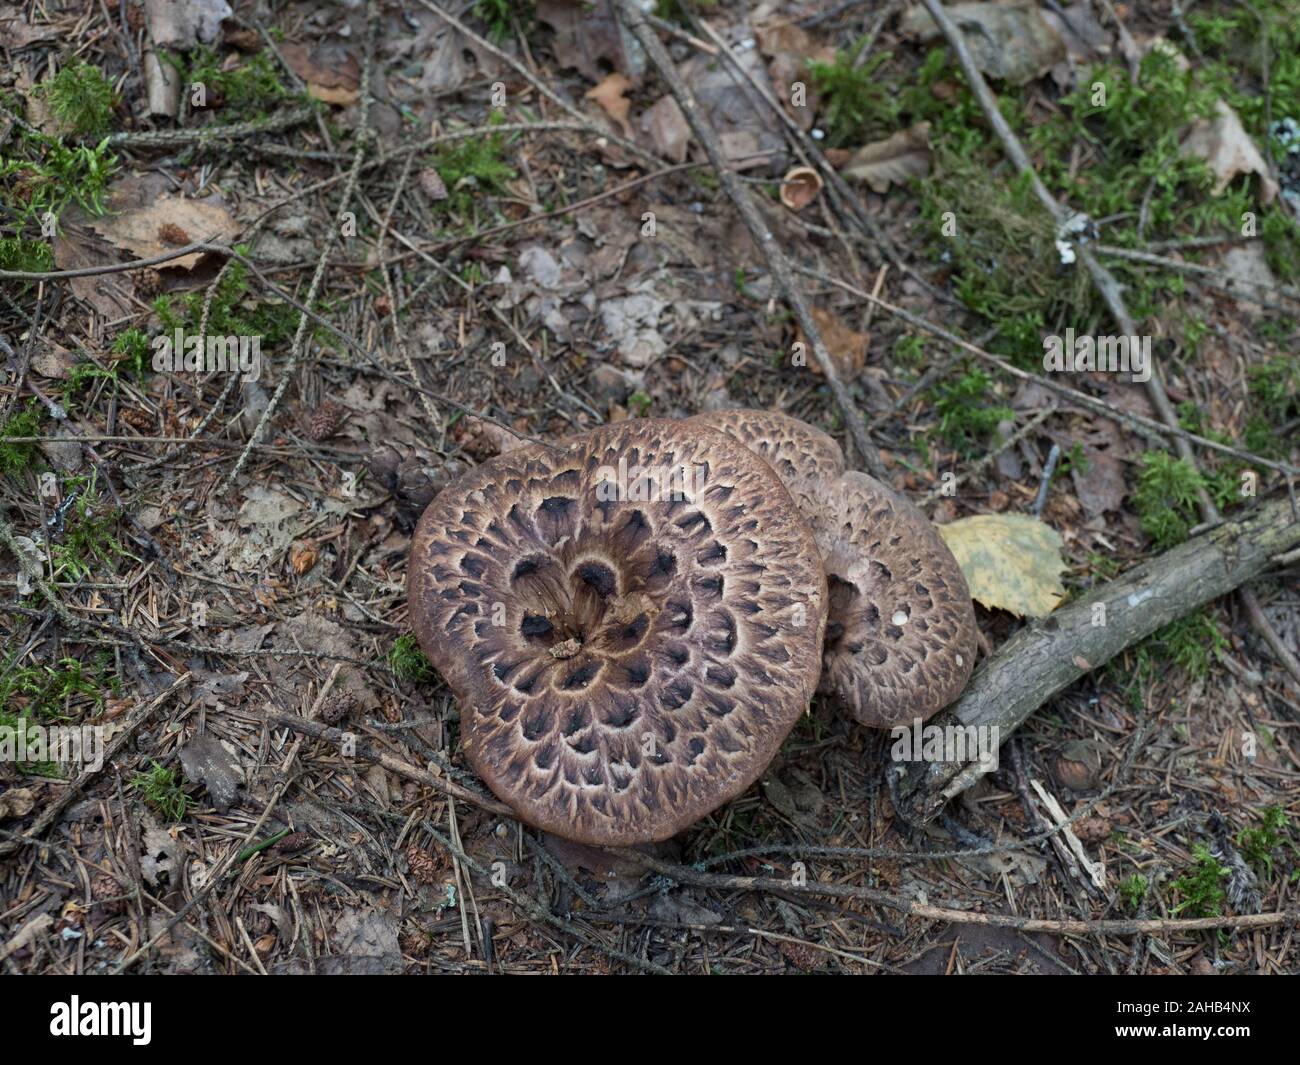 Sarcodon imbricatus, commonly known as the shingled hedgehog or scaly hedgehog,  growing in Görvälns naturreservat, Sweden. Stock Photo